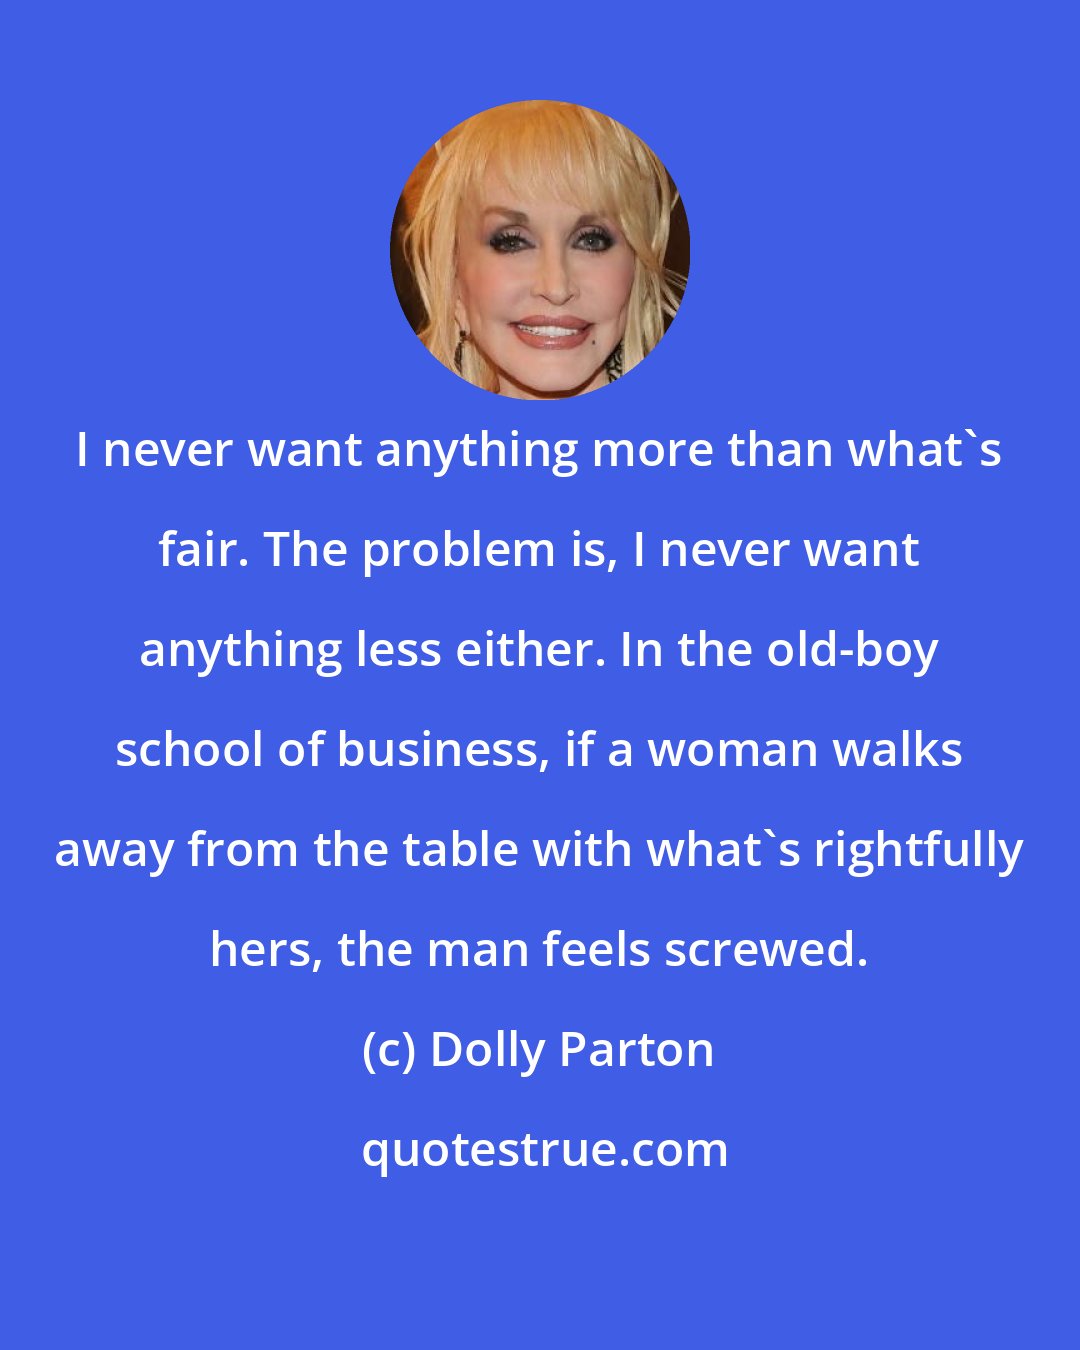 Dolly Parton: I never want anything more than what's fair. The problem is, I never want anything less either. In the old-boy school of business, if a woman walks away from the table with what's rightfully hers, the man feels screwed.